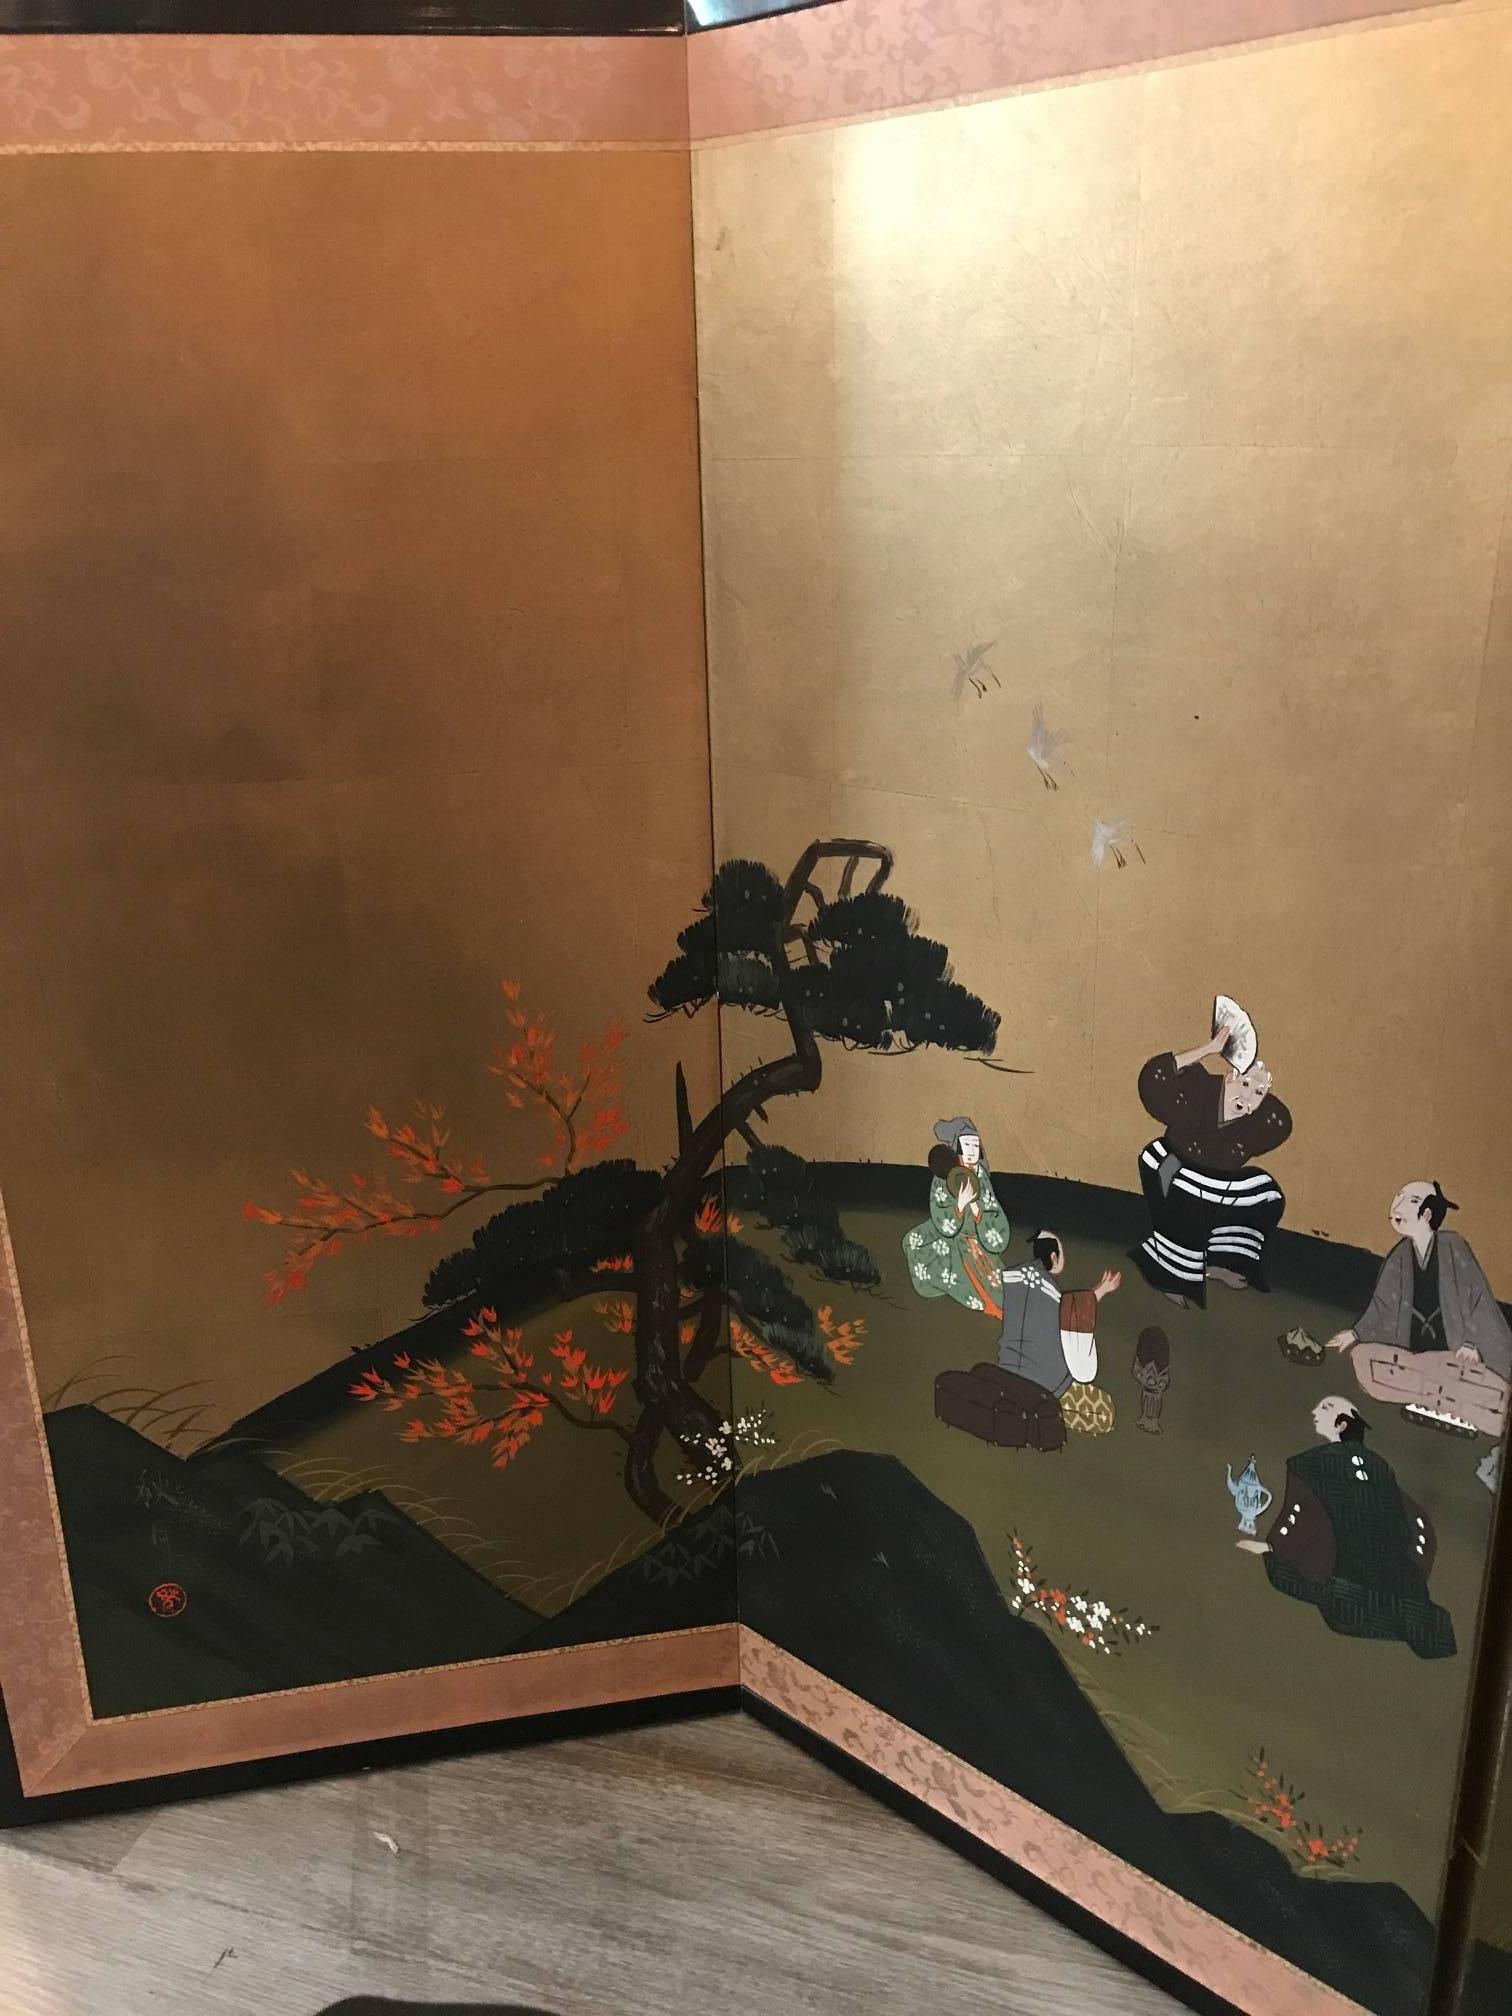 A four-panel hand-painted Japanese Byobu screen with ebonized frame. Each panel is 16.5